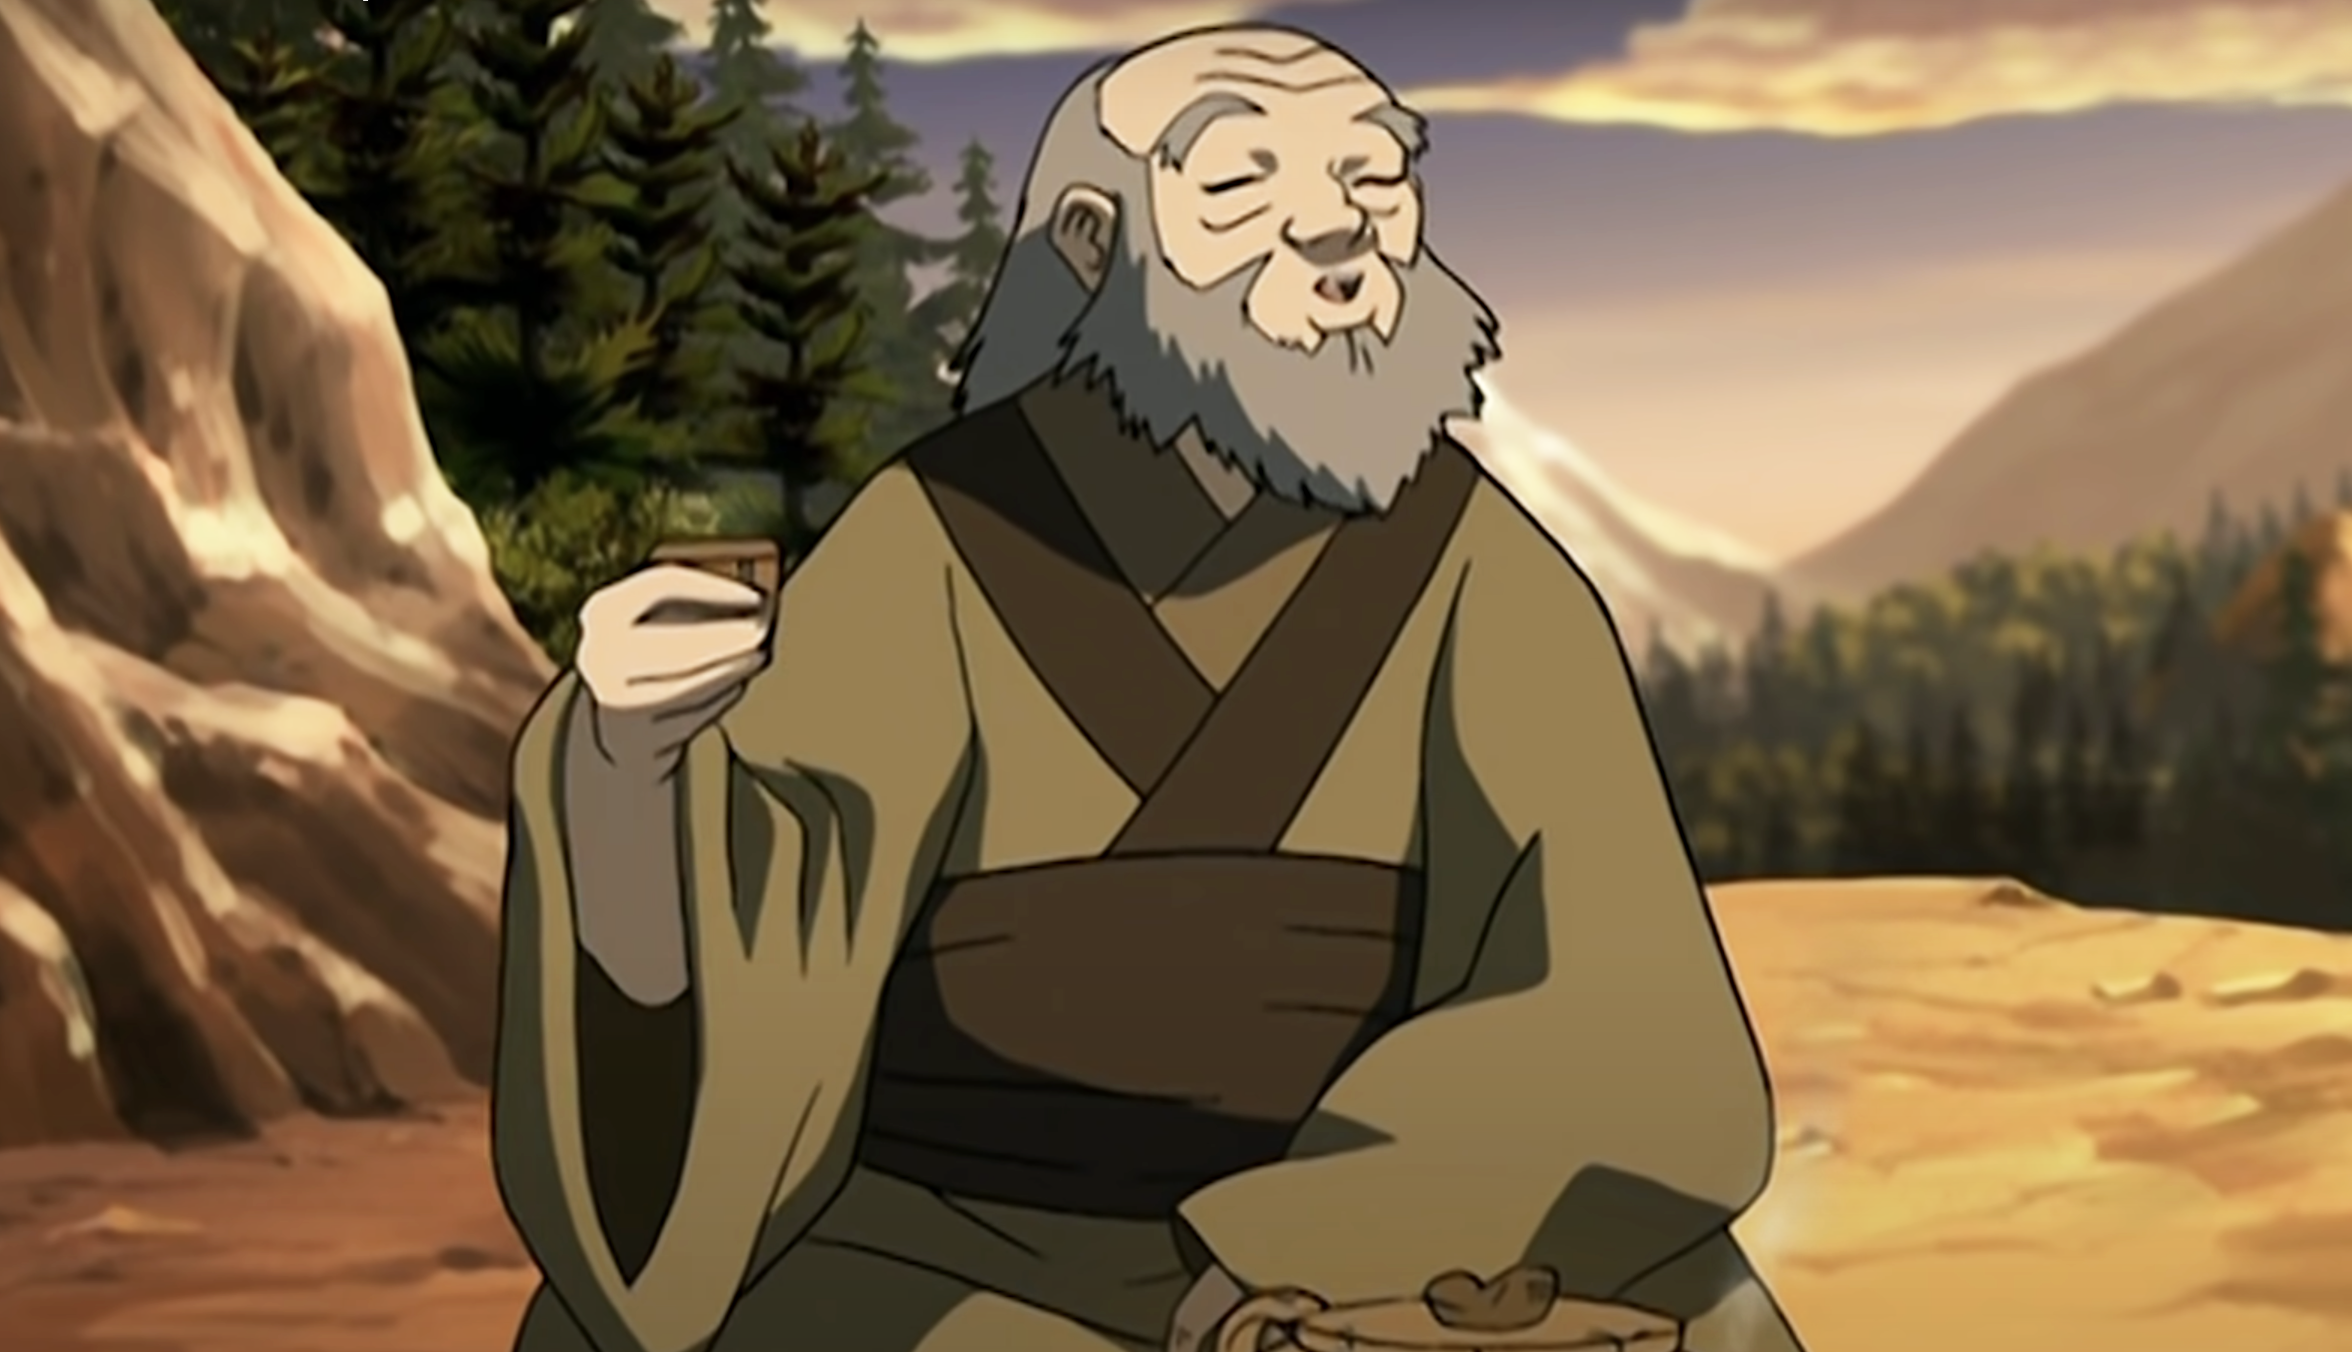 Uncle Iroh enjoying a cup of tea with Toph a mountainside 